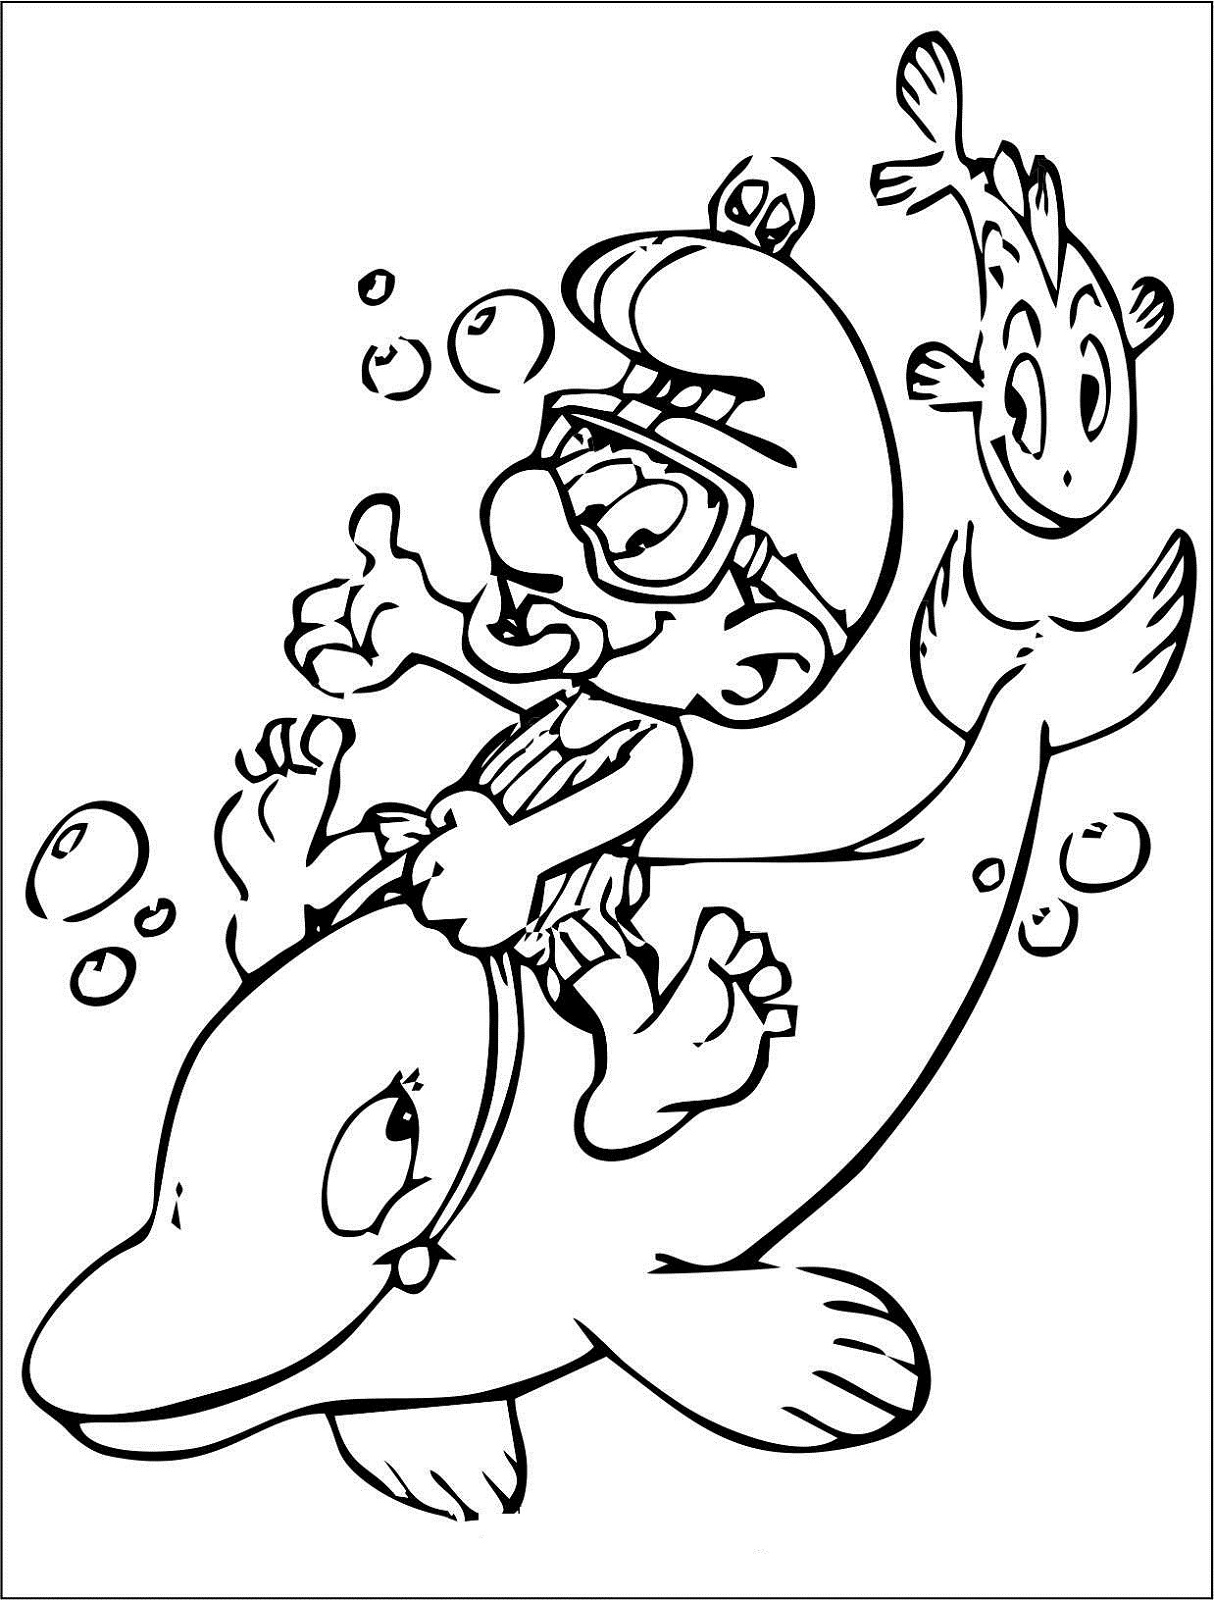 Free Coloring Sheets to Print Smurfs